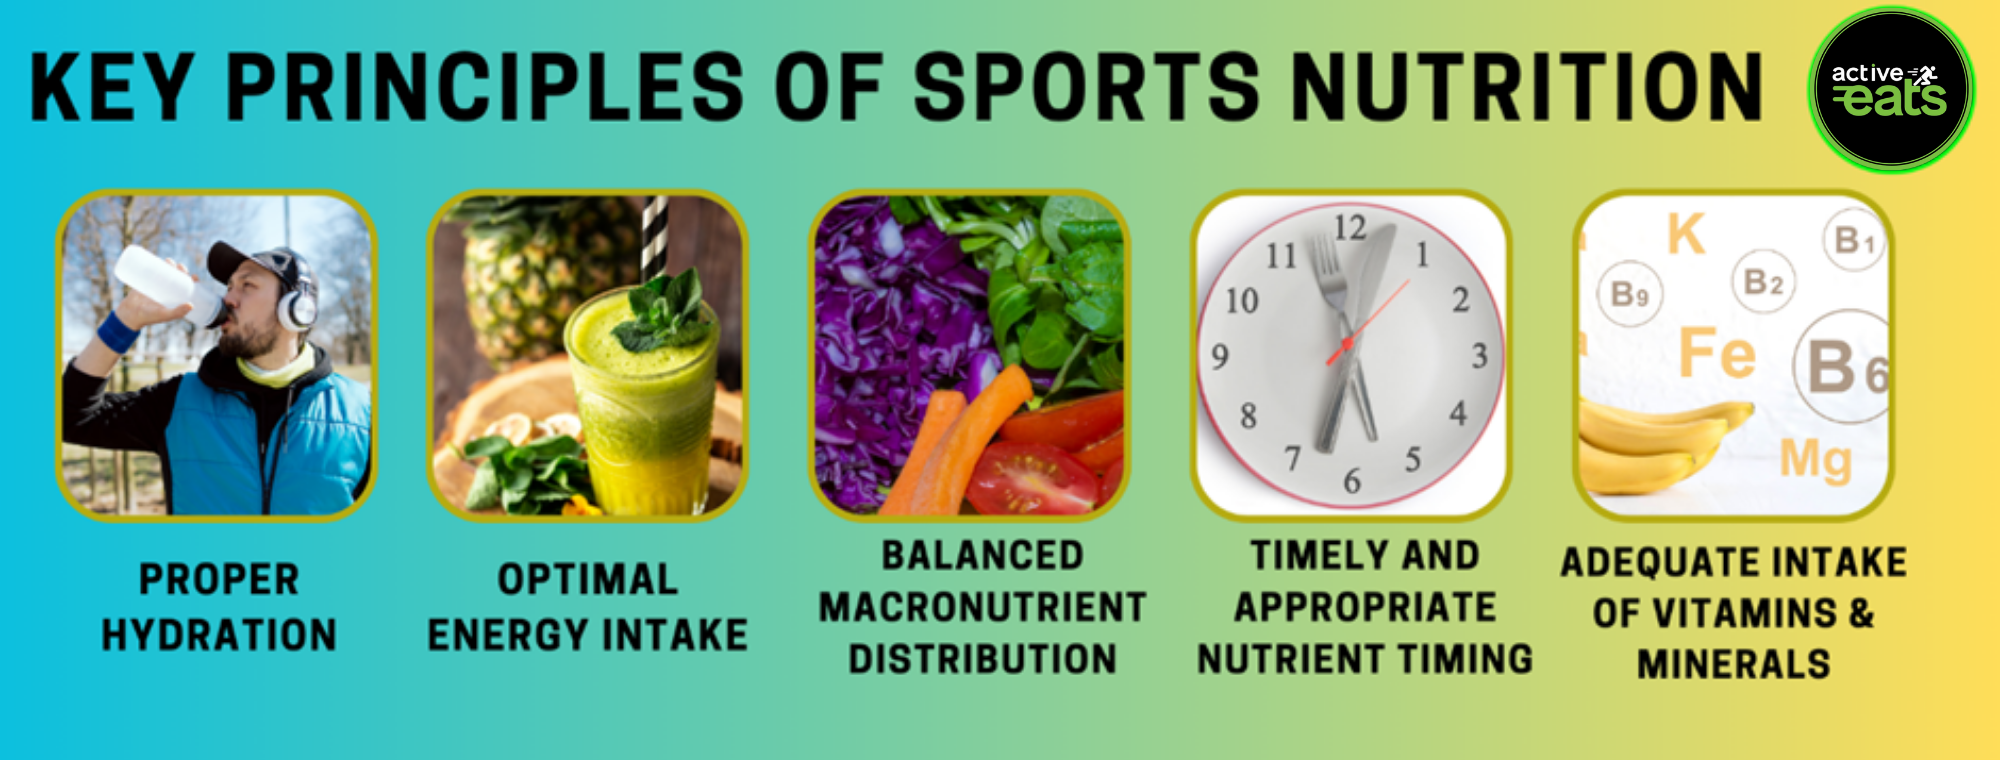 Image indicates key principles of sports nutrition. First image shows the importance of proper hydration. Second principle is optimal energy intake which comes from various juices and drinks and healthy carbs. Third principle is balanced macronutrients distribution that is obtained from eating various fruits and vegetables. Fourth principle is timely appropriate nutrient timings which play an important role in sports nutrition. and the fifth principle is adequate intake of necessary vitamins and minerals that are required. 